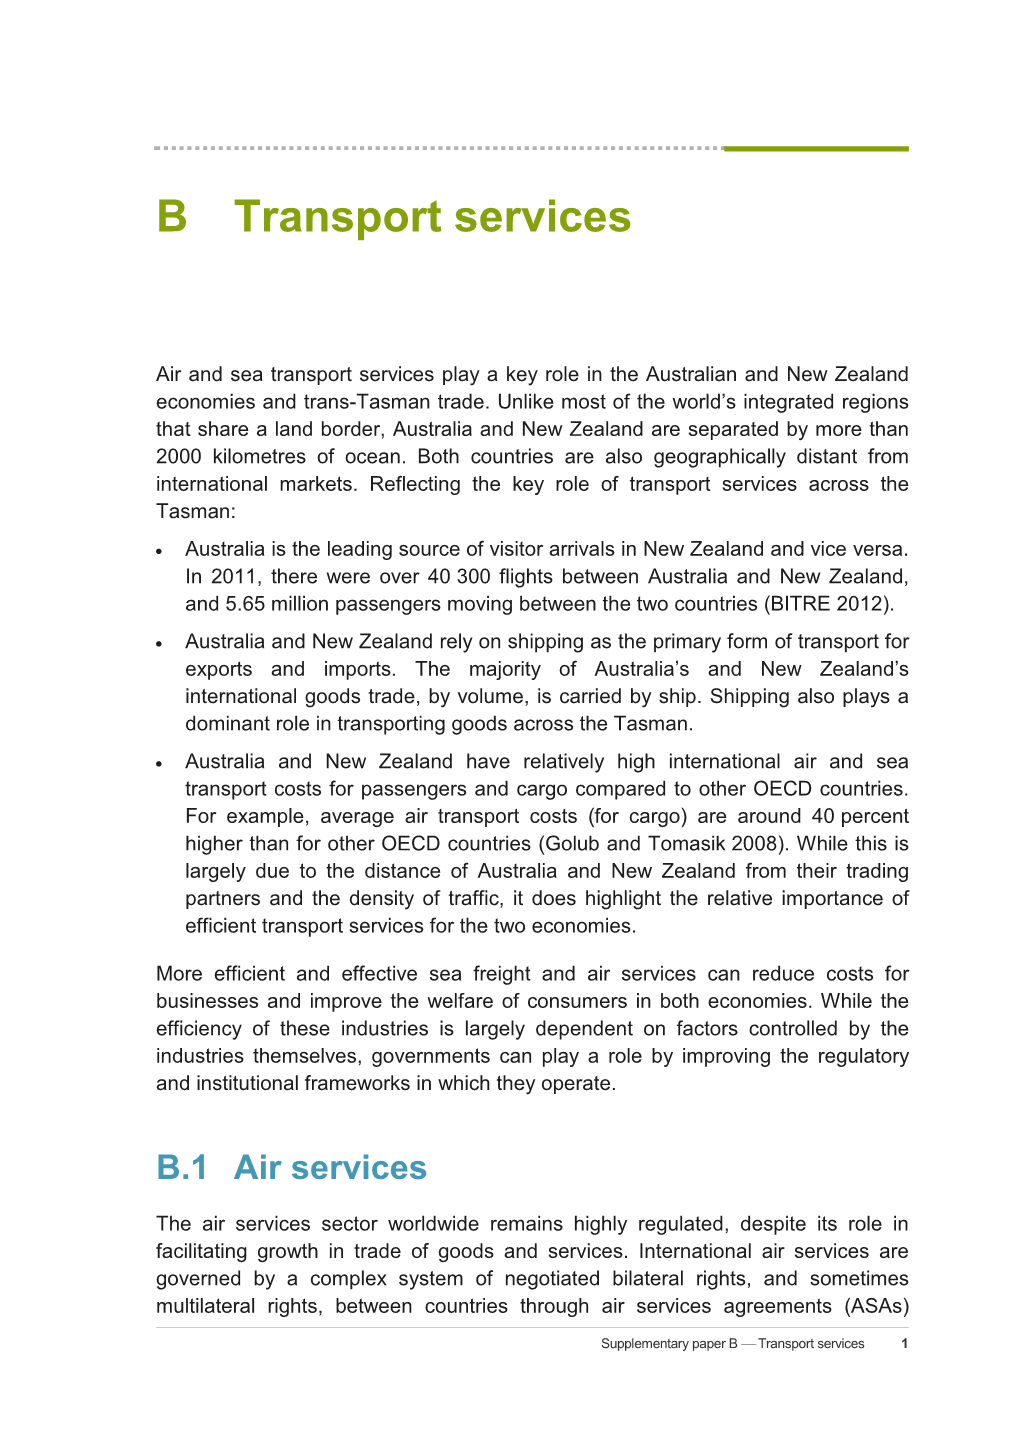 Supplementary Paper B Transport Services